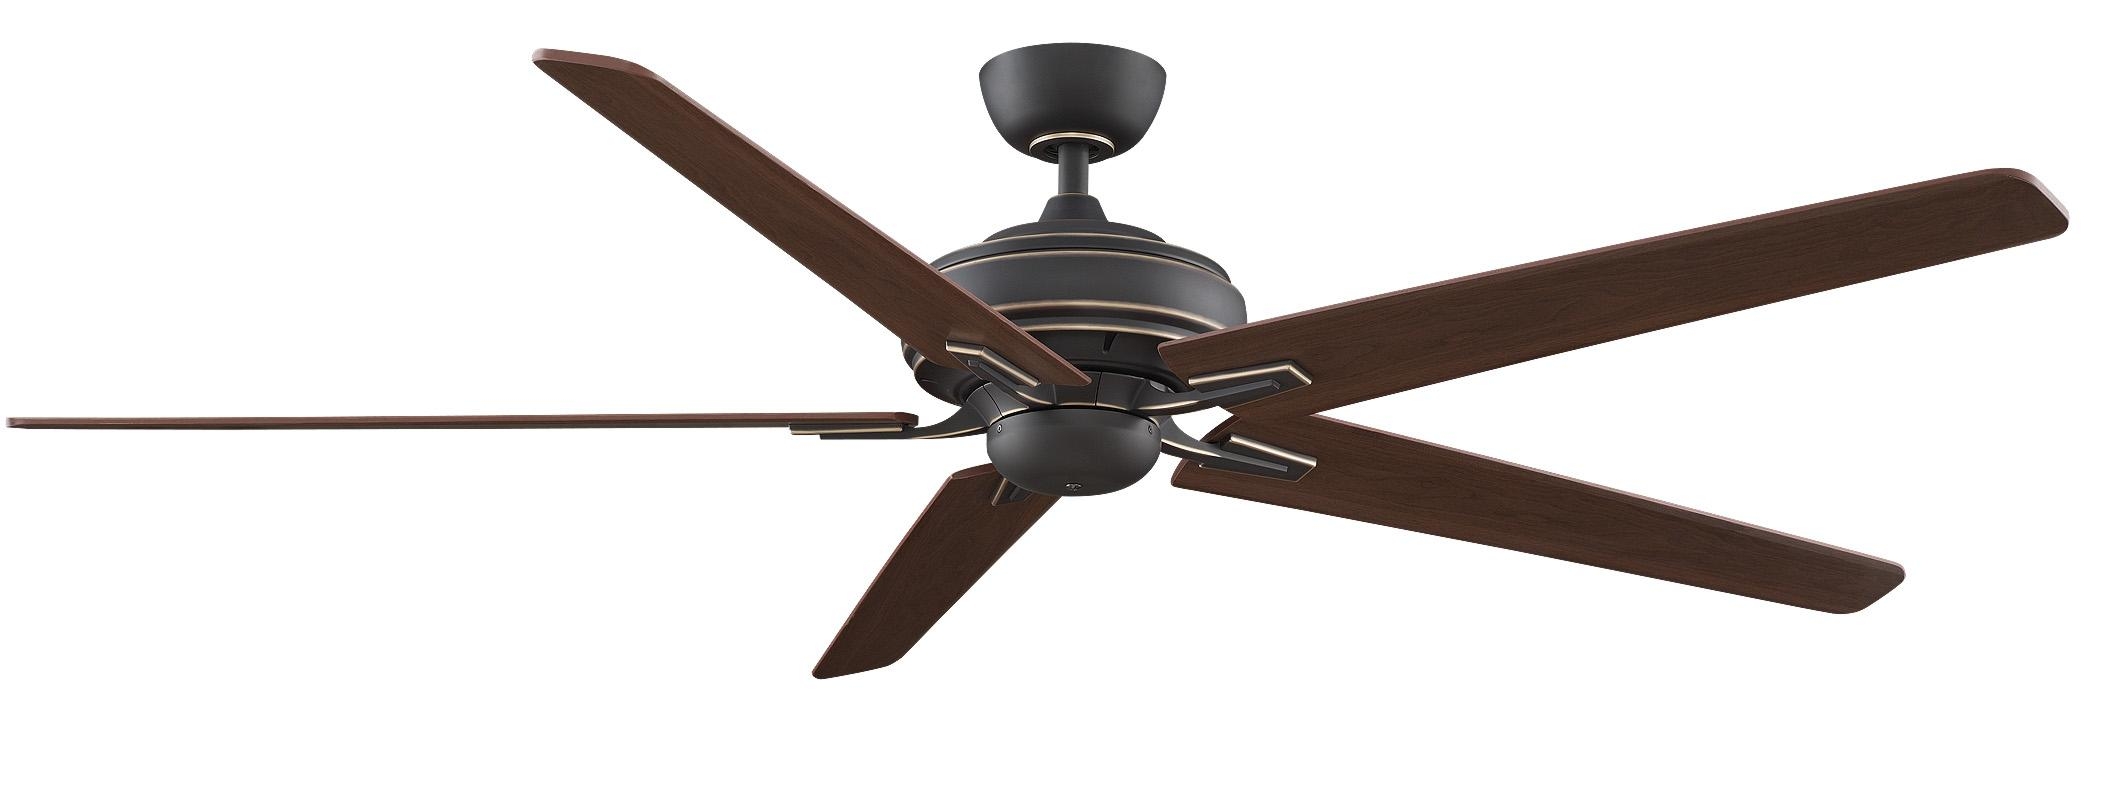 Best Outdoor Ceiling Fans Without Lights